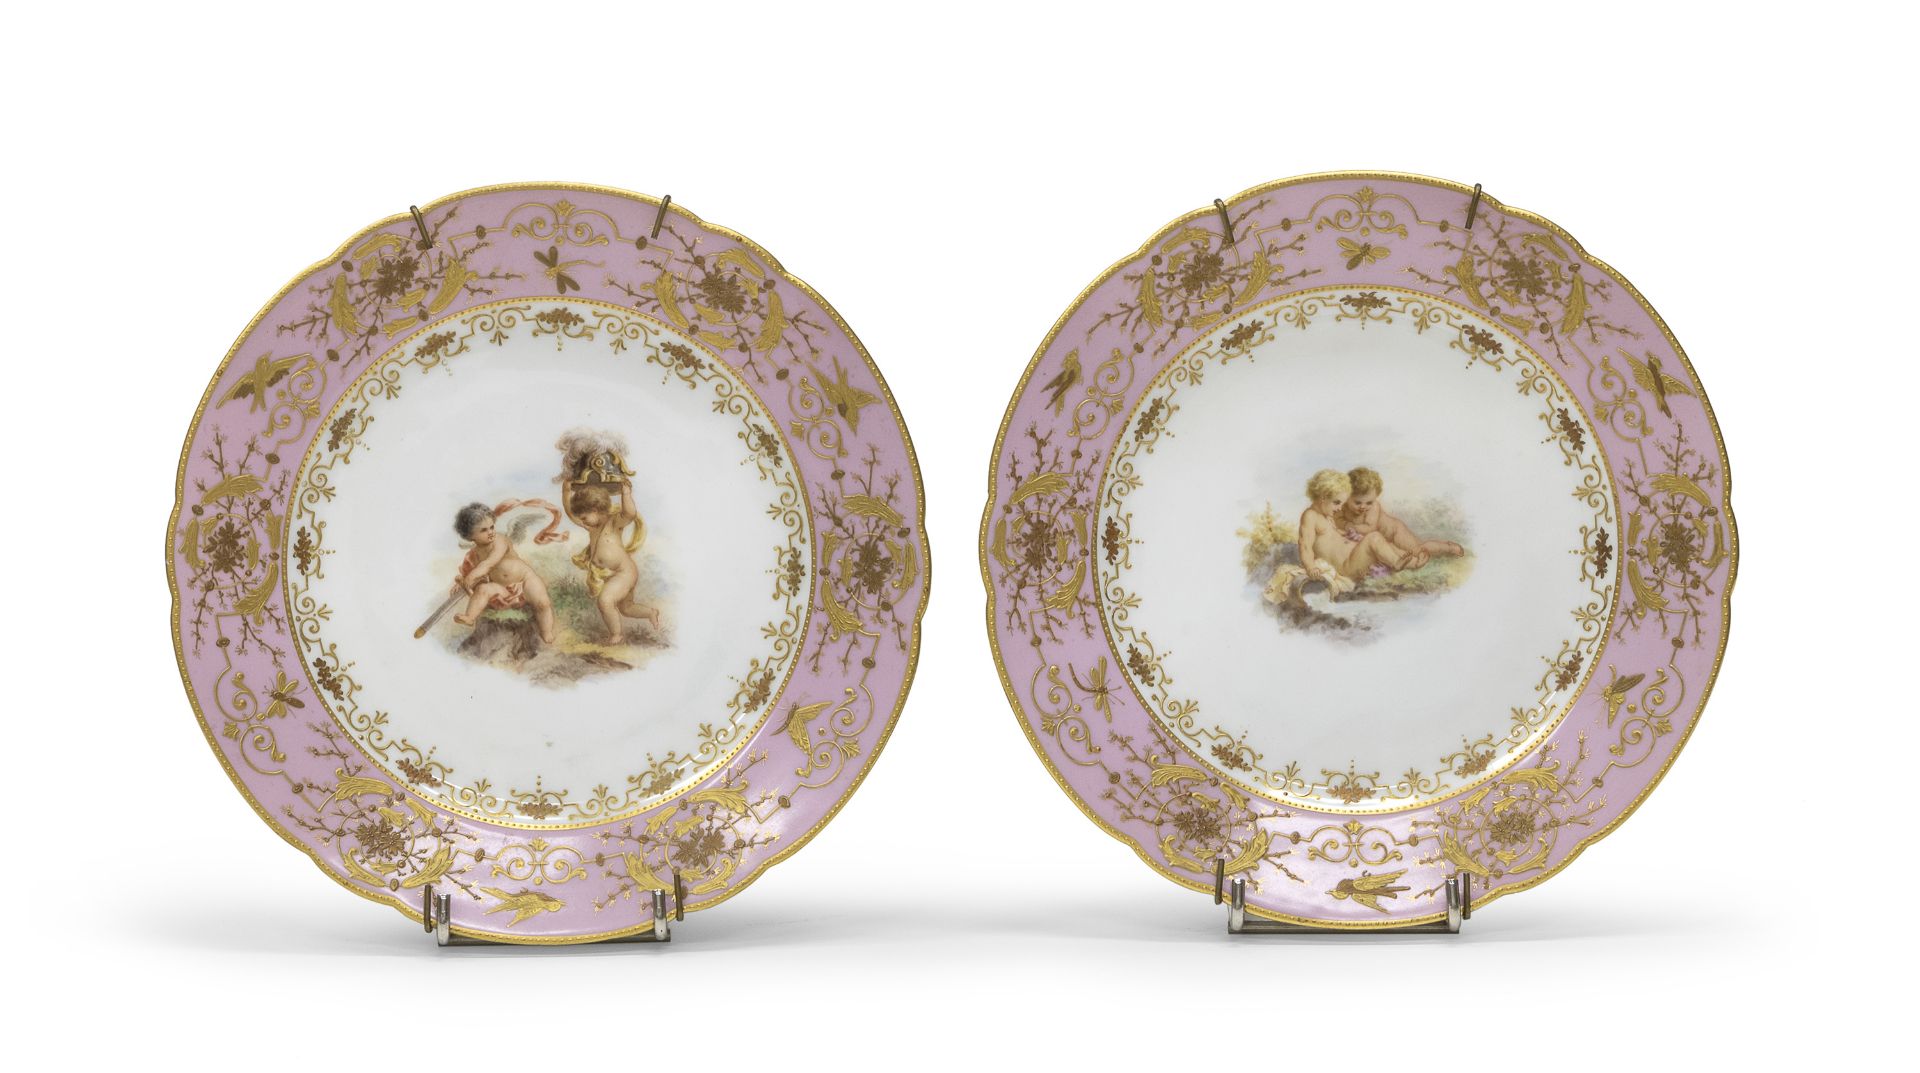 PAIR OF PORCELAIN PLATES SEVRES END OF THE 19TH CENTURY